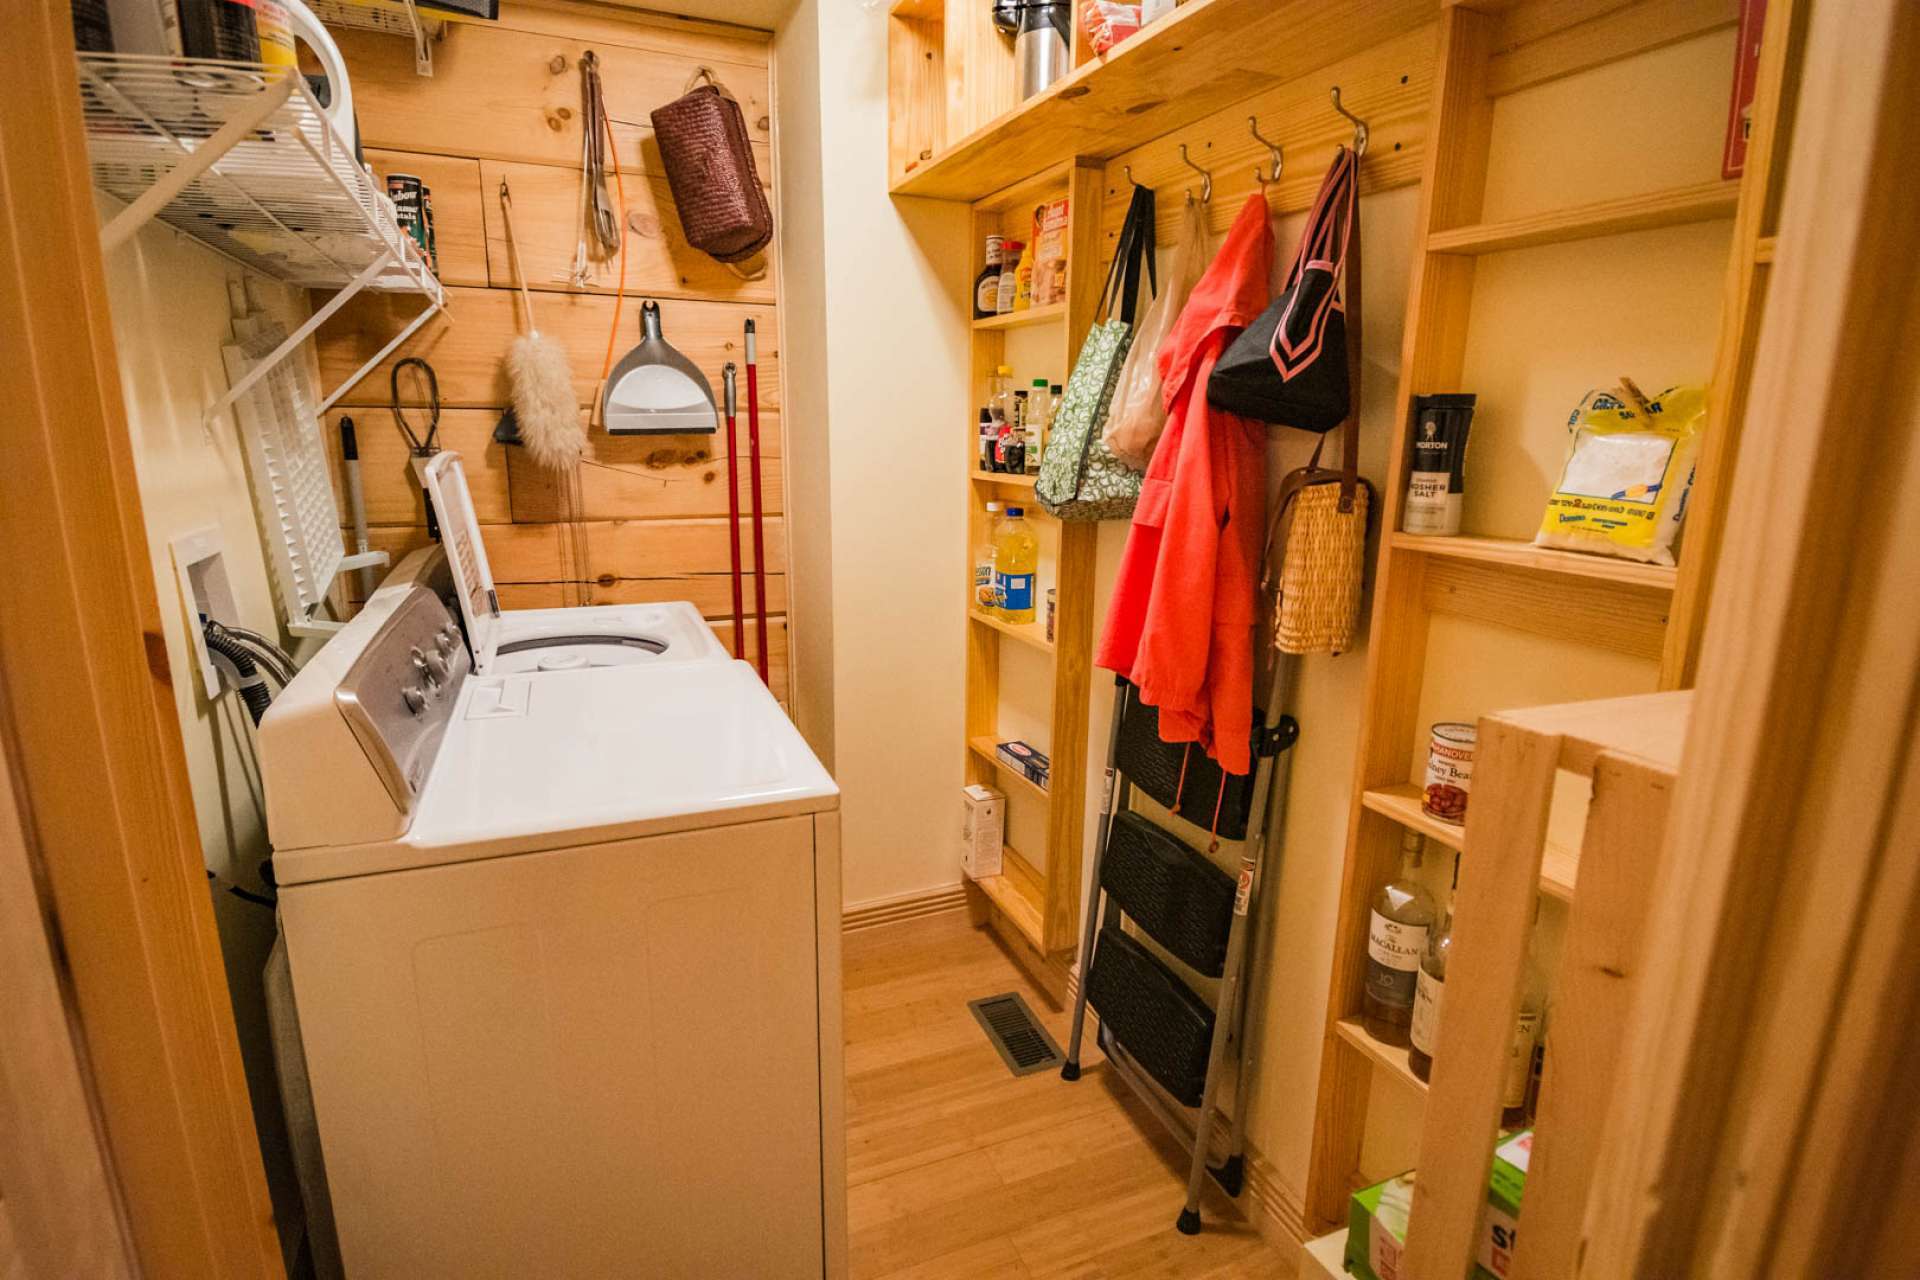 Conveniently located on the main level, the laundry room also offers additional storage space.